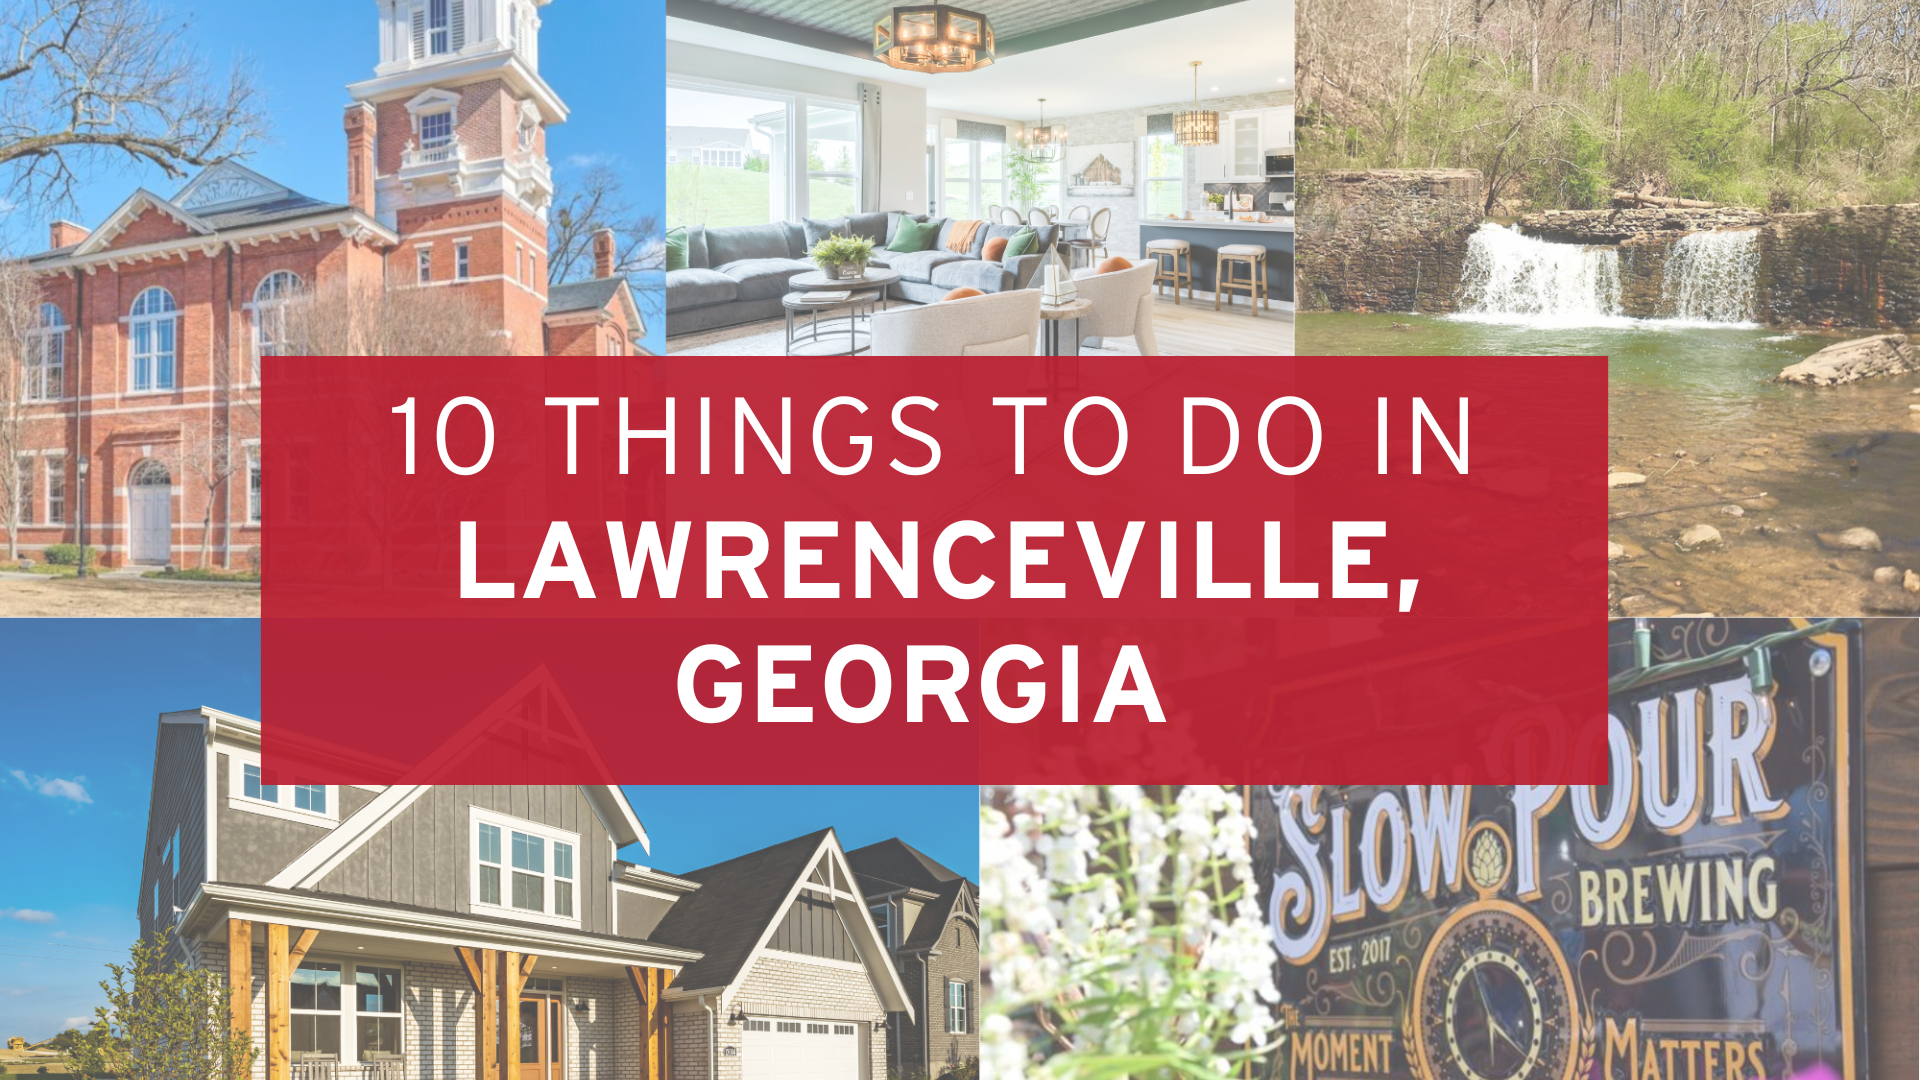 10 Things To Do In Lawrenceville, Georgia!